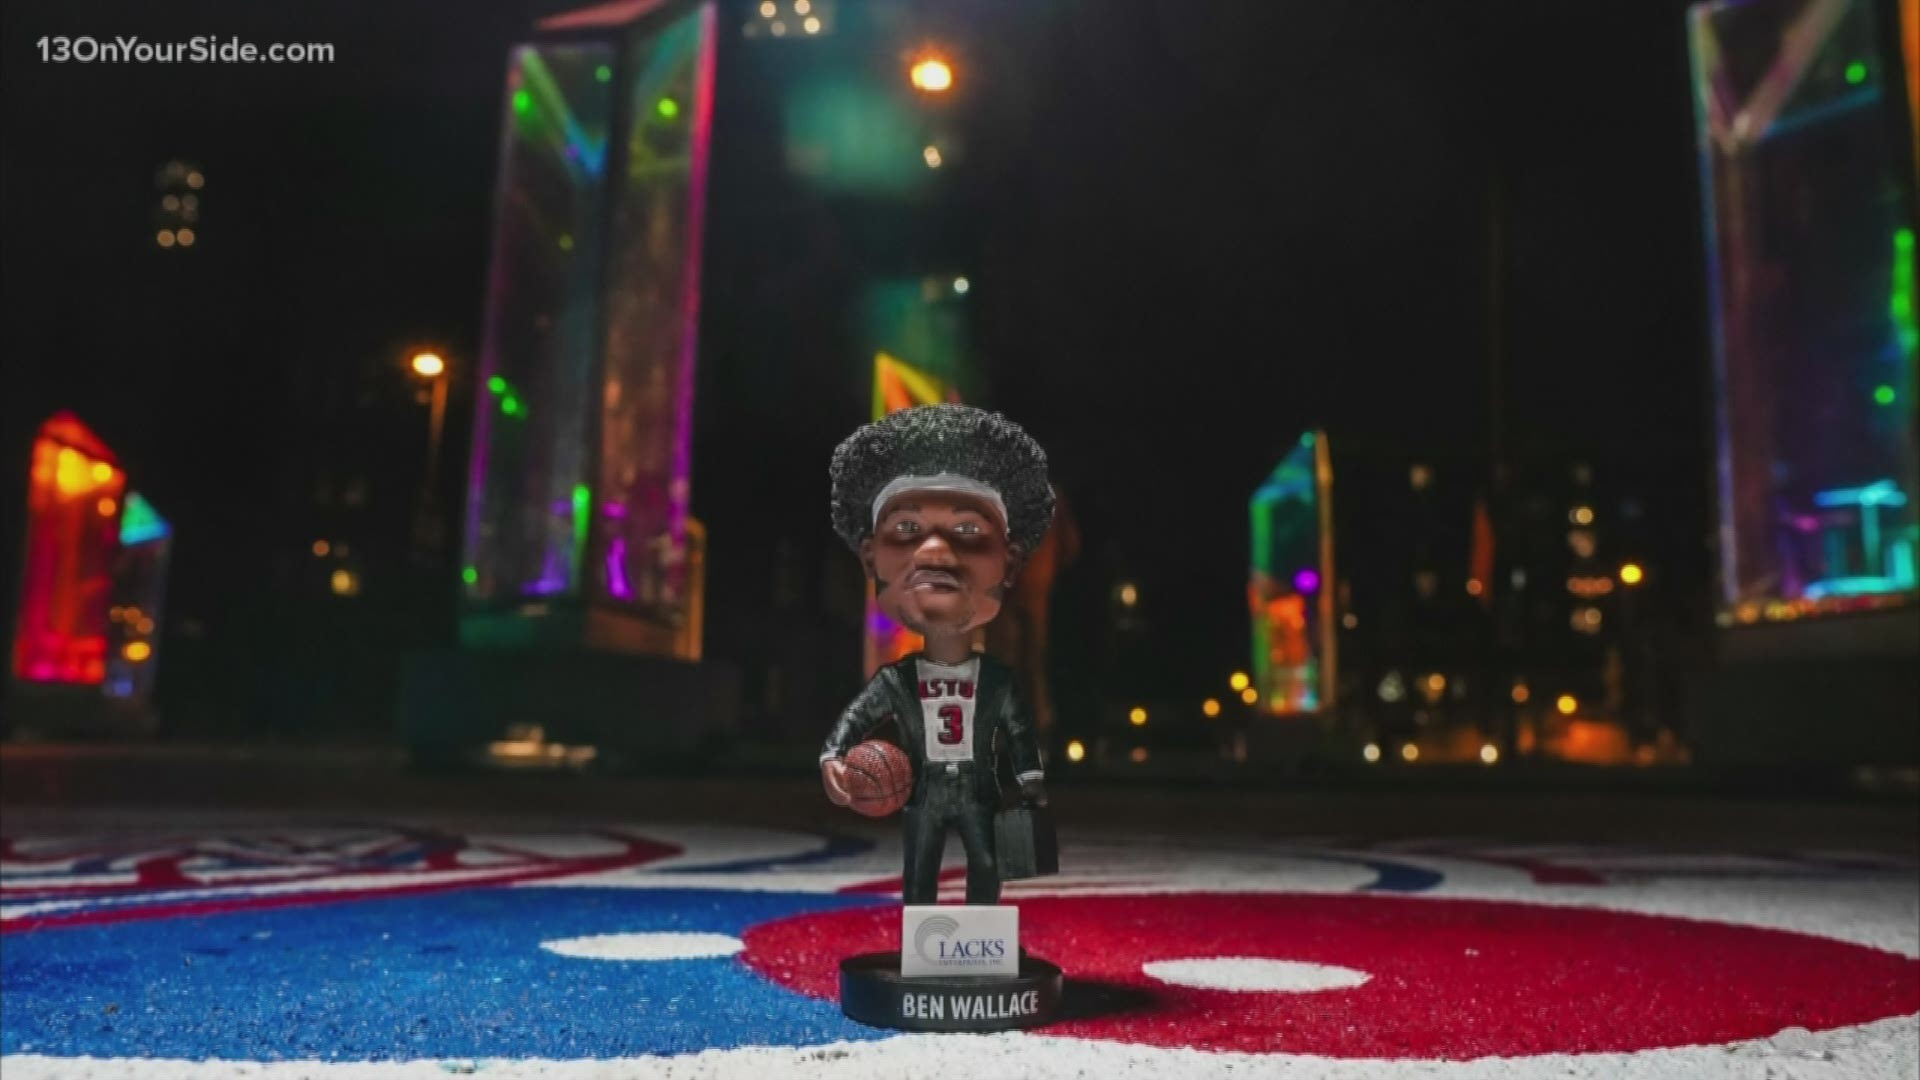 Before the Drive tip off on Saturday night at 7 against the Lakeland Magic, they'll be handing out this bobble head to fans coming into the arena.